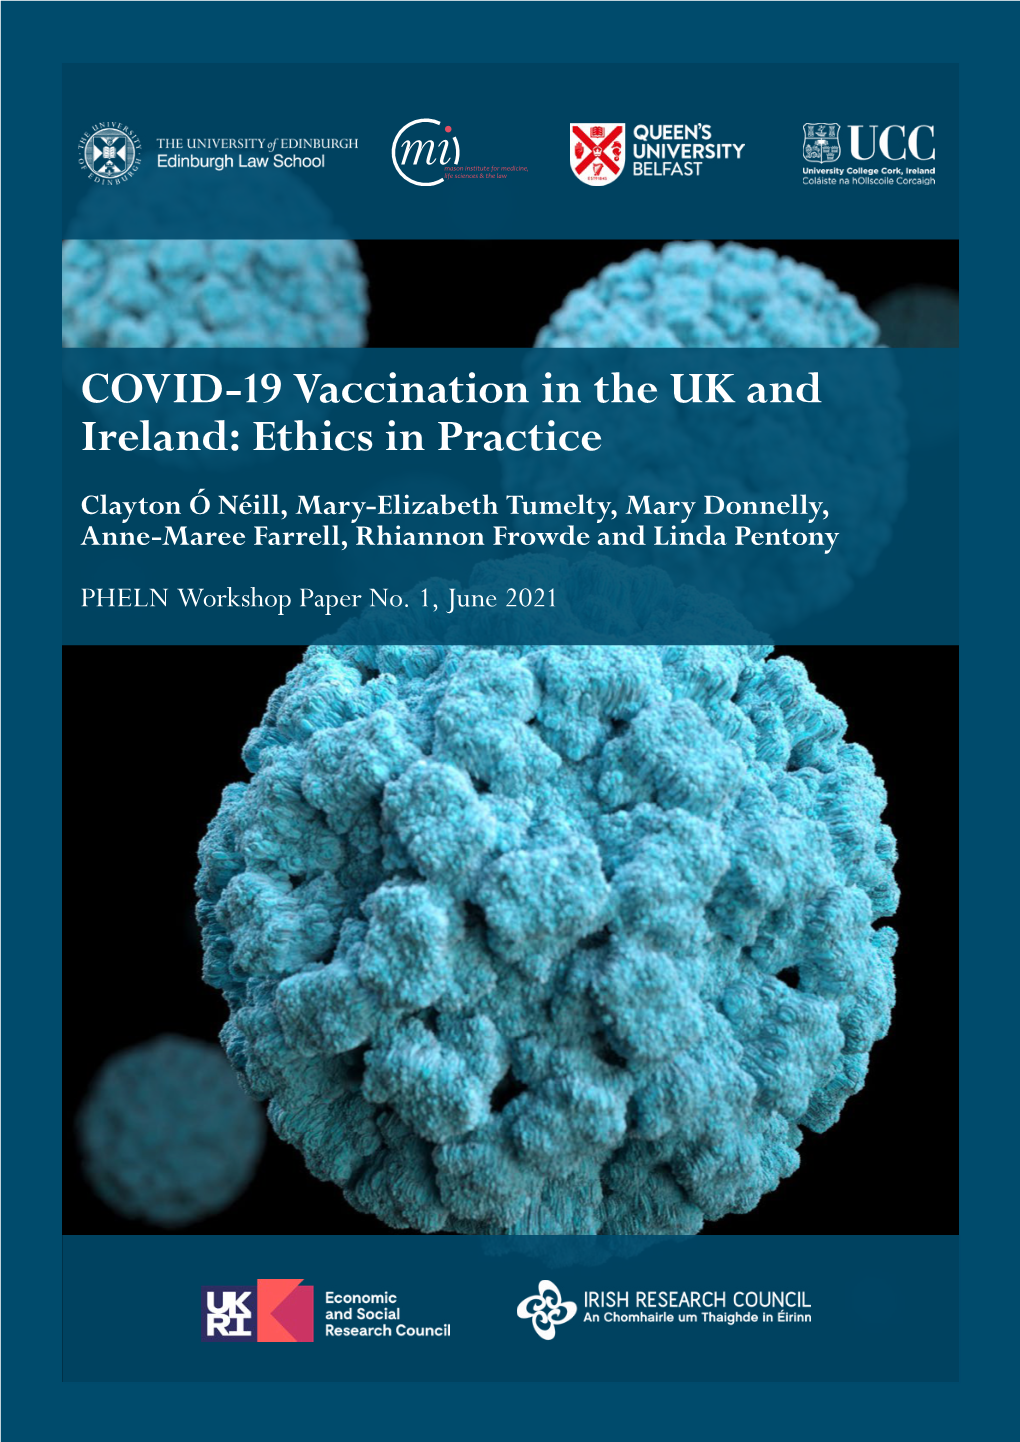 COVID-19 Vaccination in the UK and Ireland: Ethics in Practice